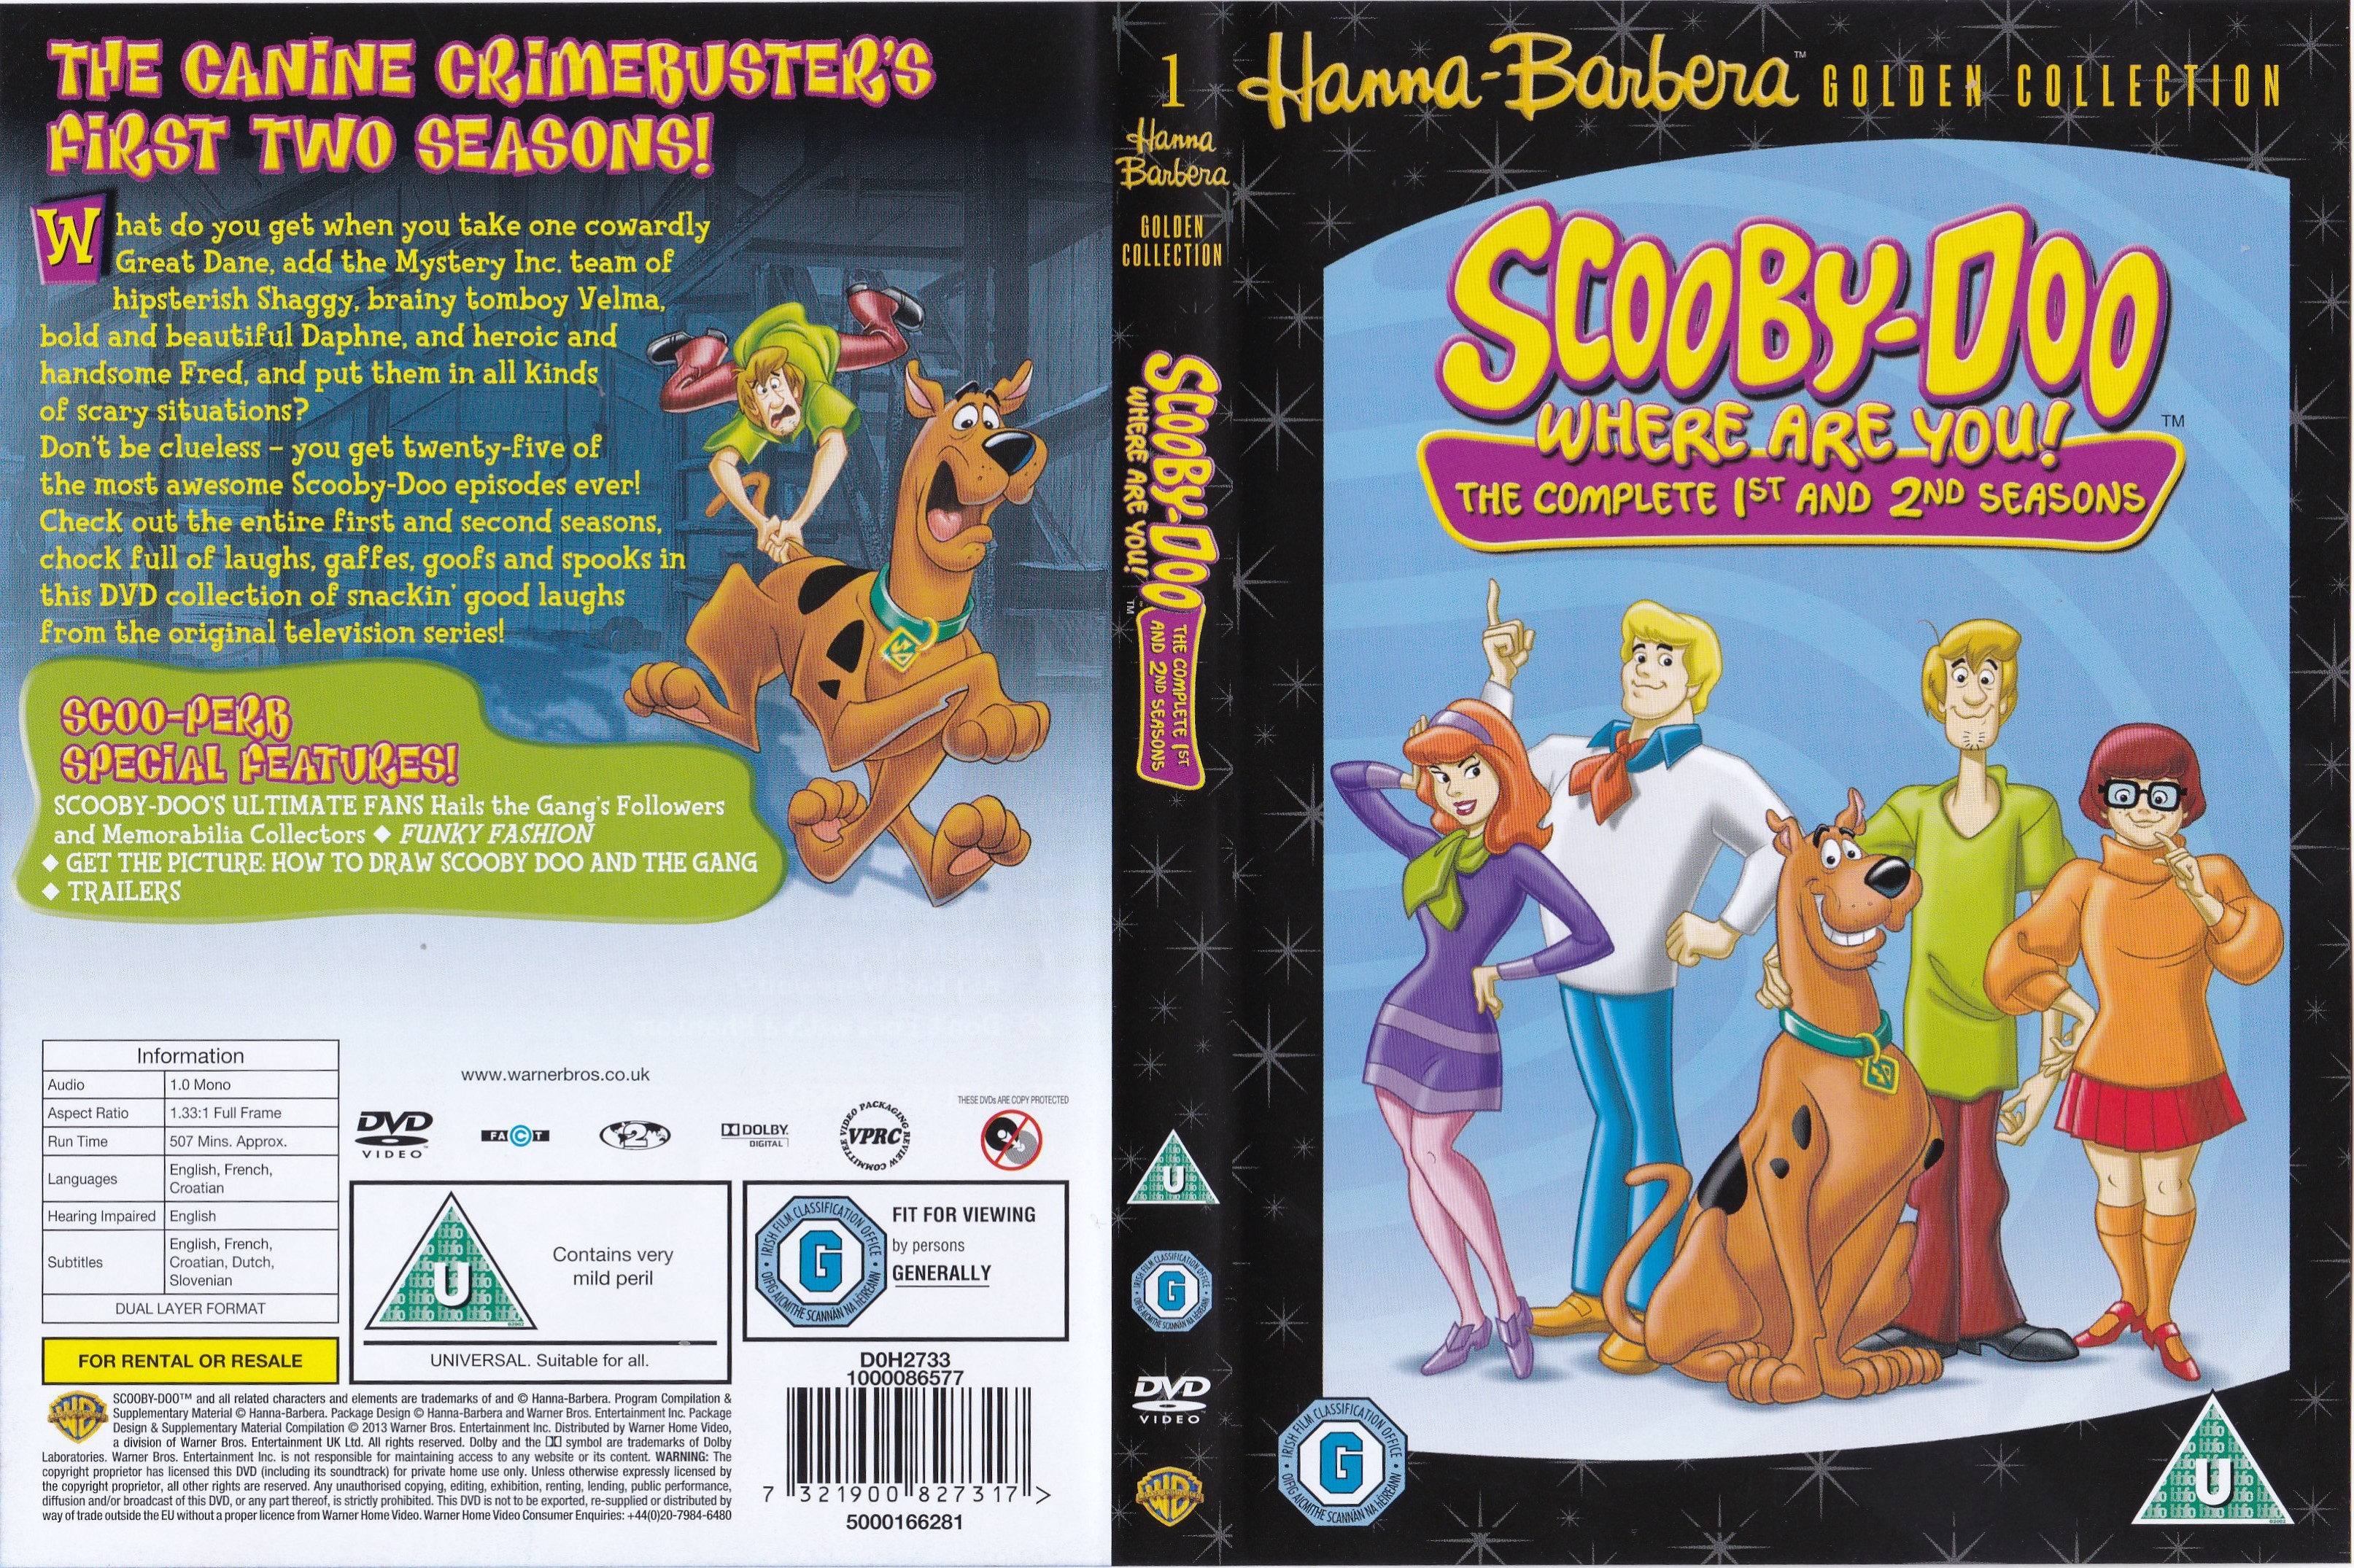 Jaquette DVD Scooby-Doo Where Are You! Complete 1st and 2nd seasons